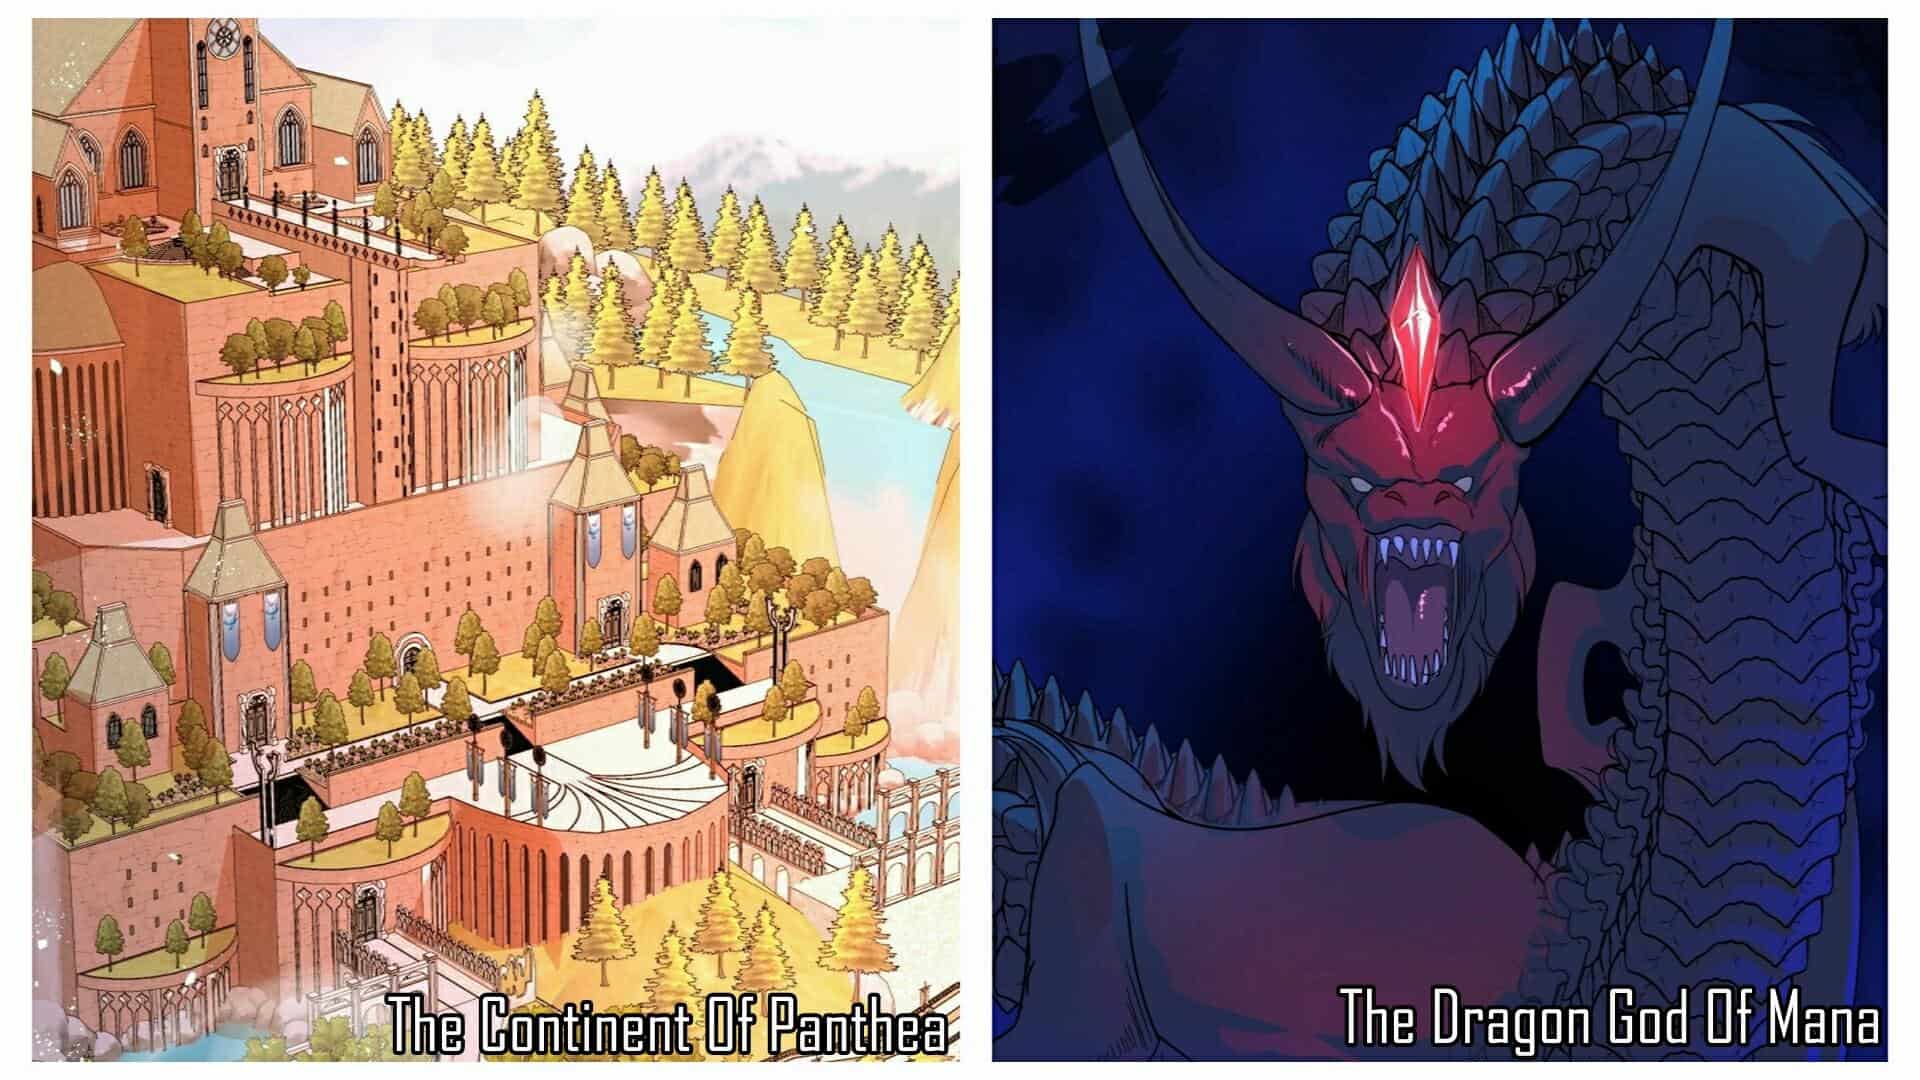 The Dragon That Transported The Protagonist To The Continent of Panthea - Lord Of Mana Chapter 1 (Credits: Alandal)